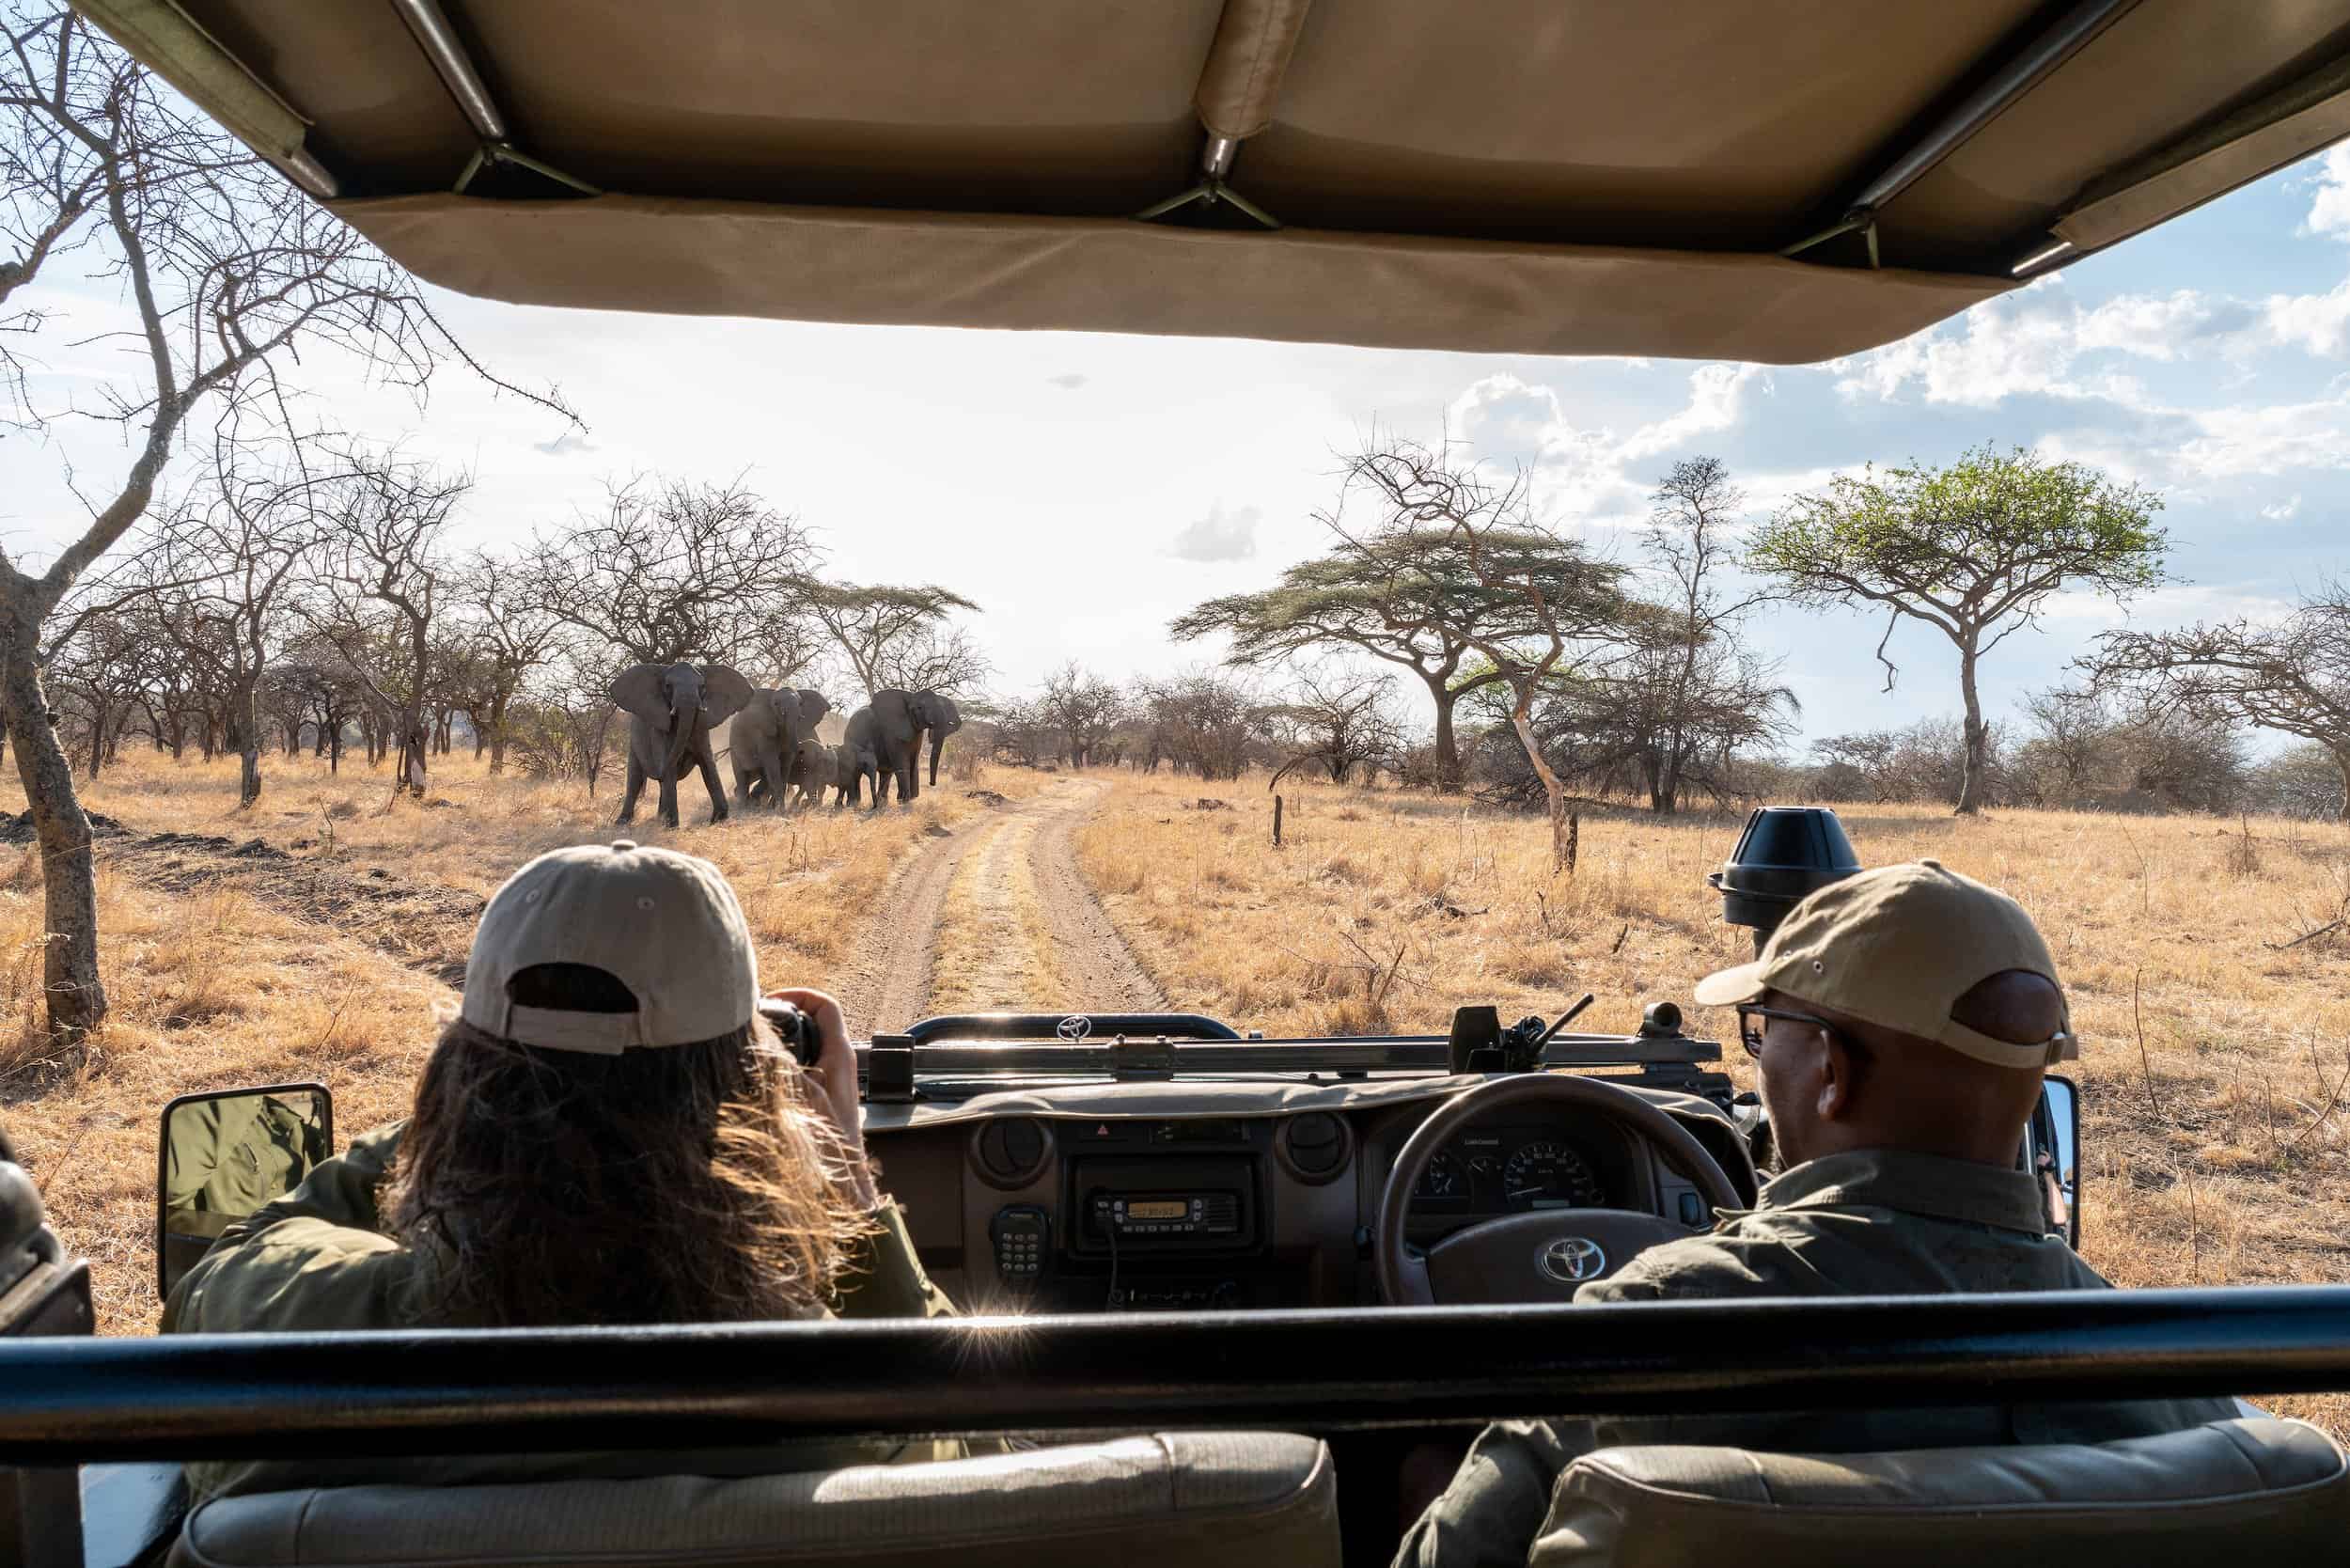 Two people sit in safari vehicle while one looks through binoculars at African elephants.  